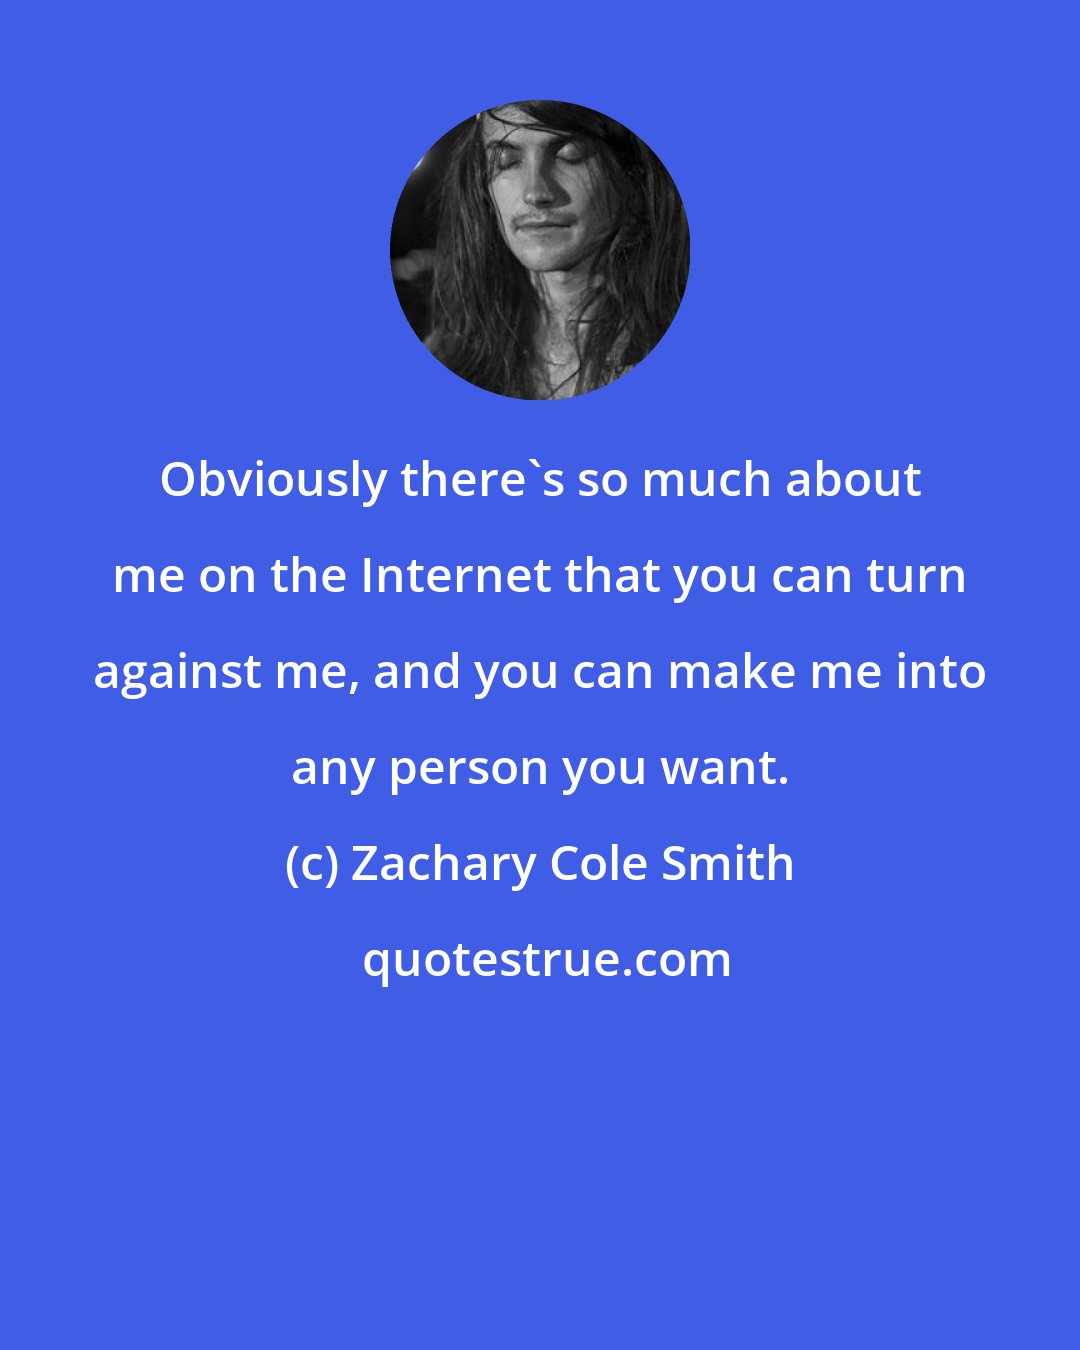 Zachary Cole Smith: Obviously there's so much about me on the Internet that you can turn against me, and you can make me into any person you want.